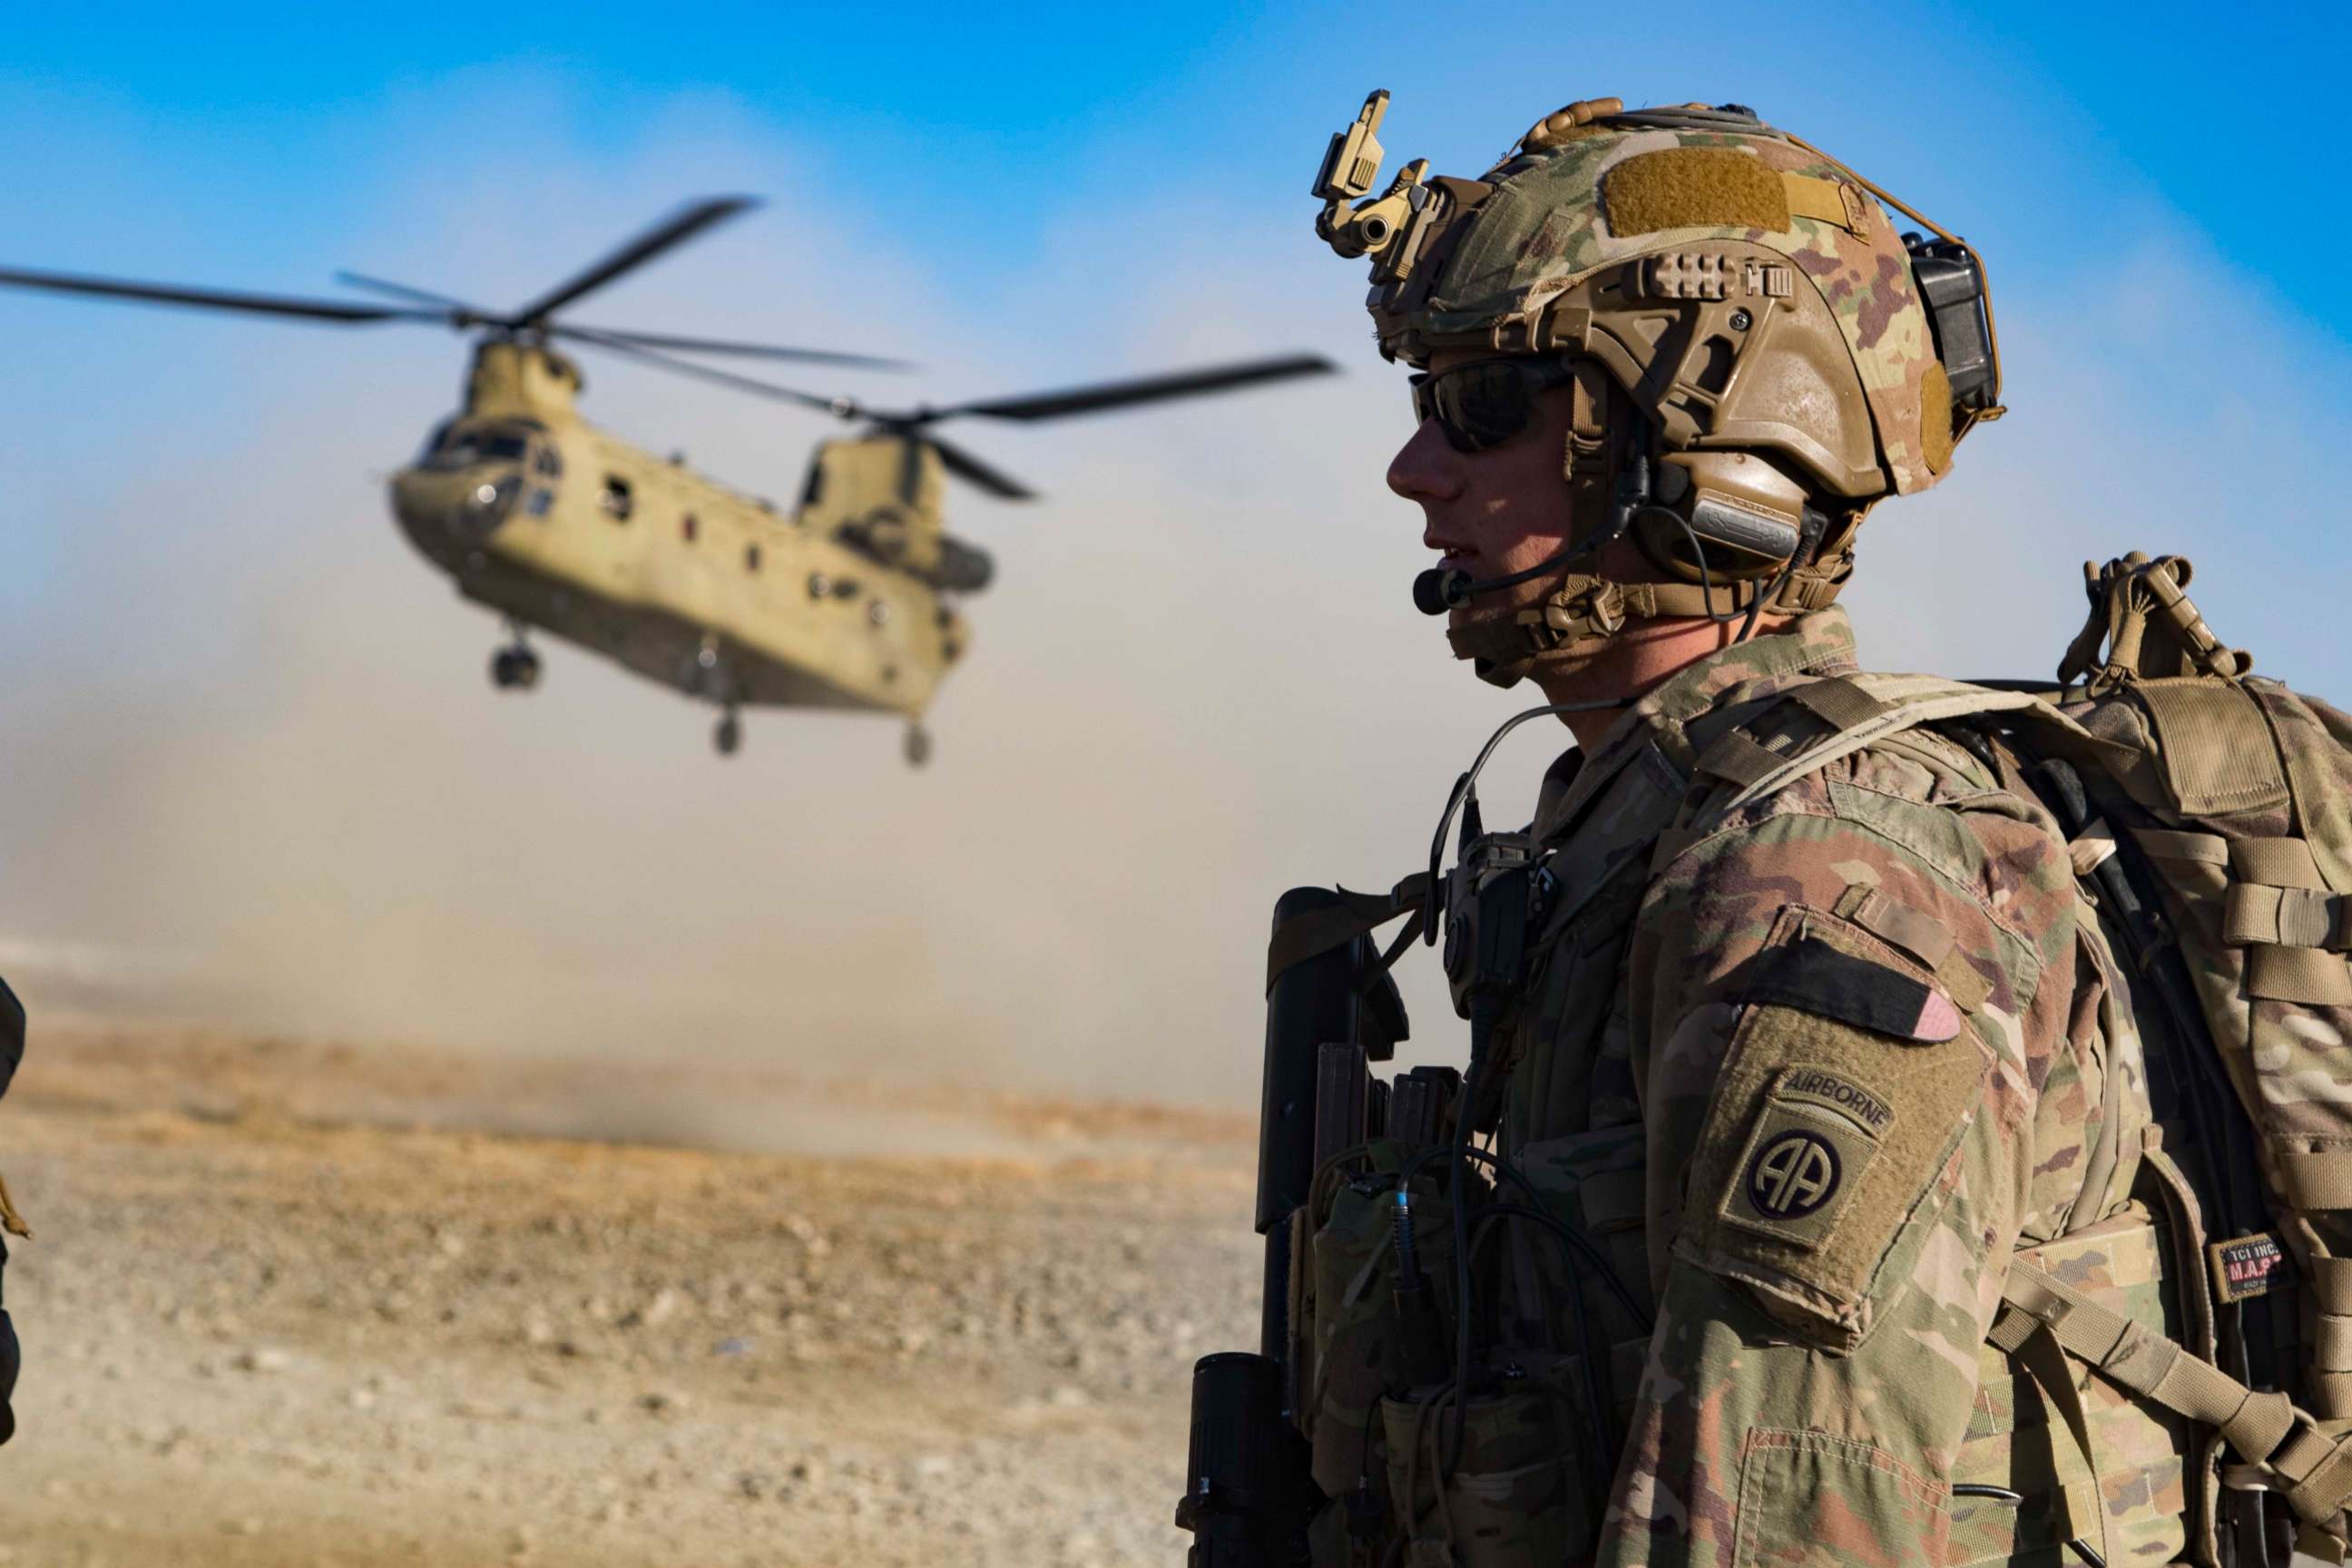 PHOTO: U.S. Army Staff Sgt. Jason N. Bobo helps secure a helicopter landing zone as a CH-47 Chinook helicopter prepares to land Southeastern Afghanistan, Dec. 29, 2019.